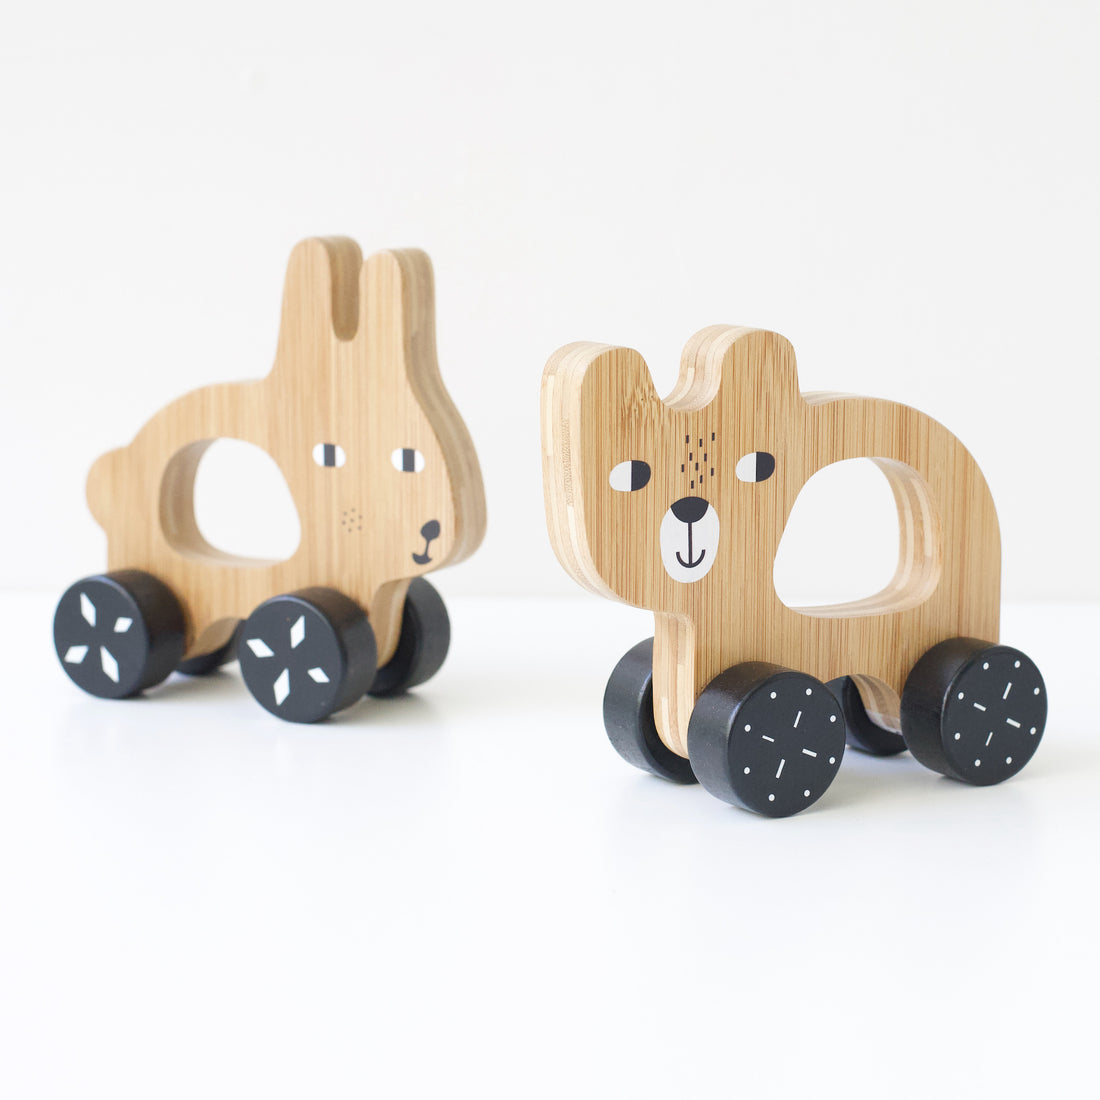 Bear Push Toy - Wood Rolling Toy for Baby & Toddler – Wee Gallery